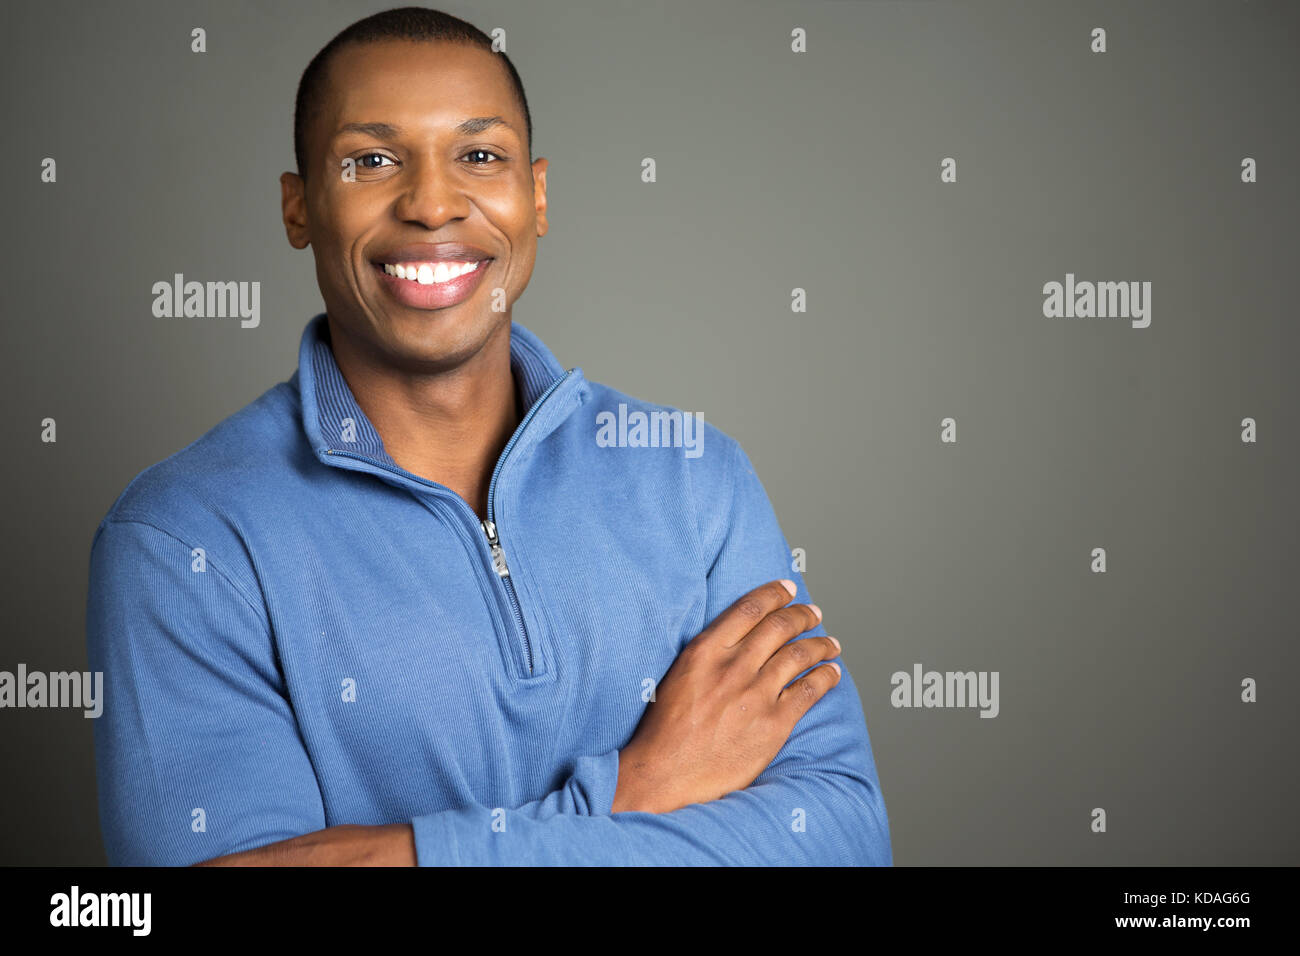 Handsome African American Man Stock Photo